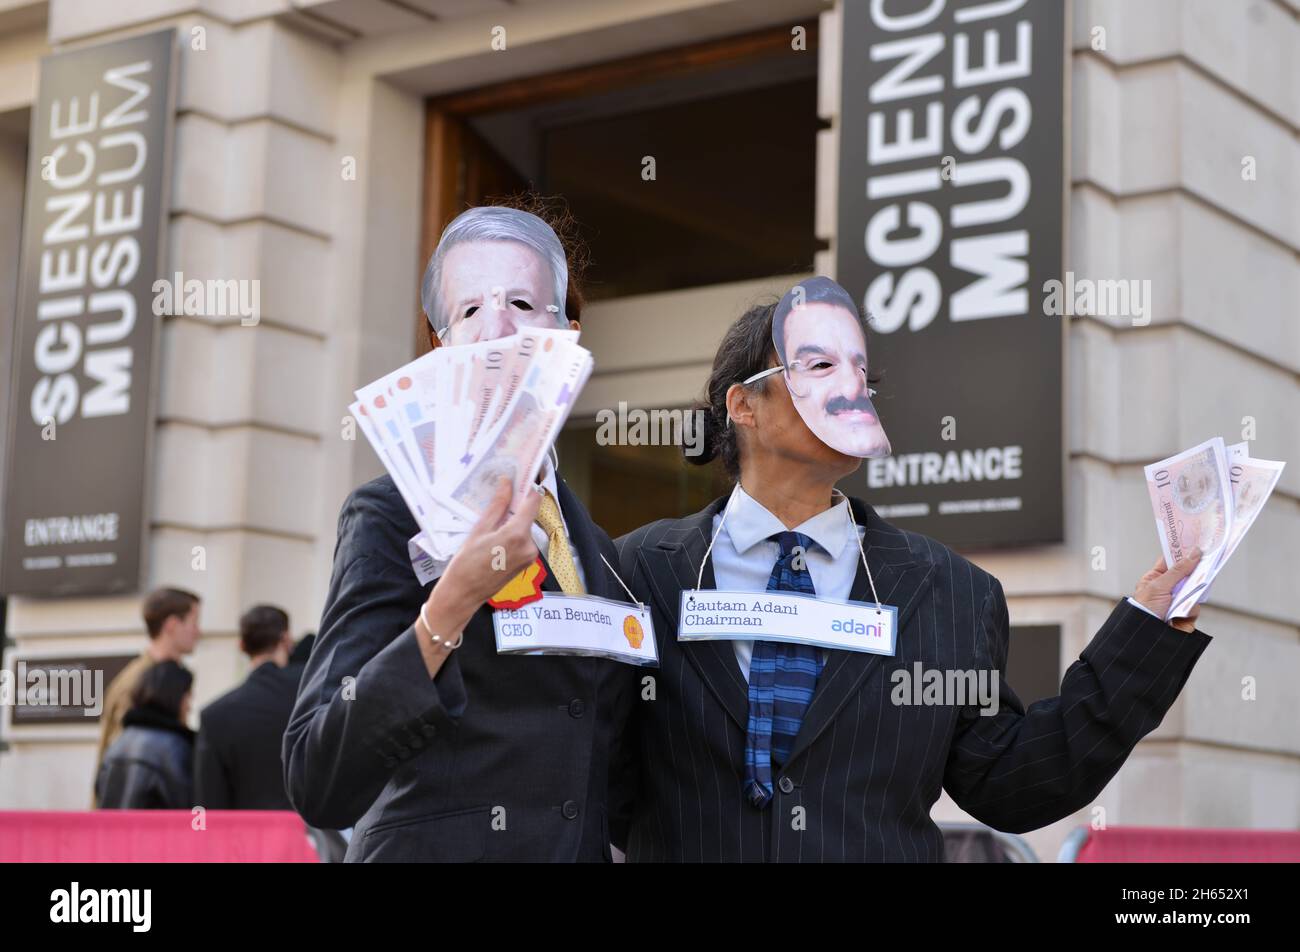 Protesters dressed as Adani chairman Gautam Adani and Shell CEO Ben van Beurden pose with fake money during the demonstration. Extinction Rebellion activists staged a protest opposite the Science Museum in South Kensington against sponsorship of the museum by fossil fuels corporations Shell and Adani. Stock Photo